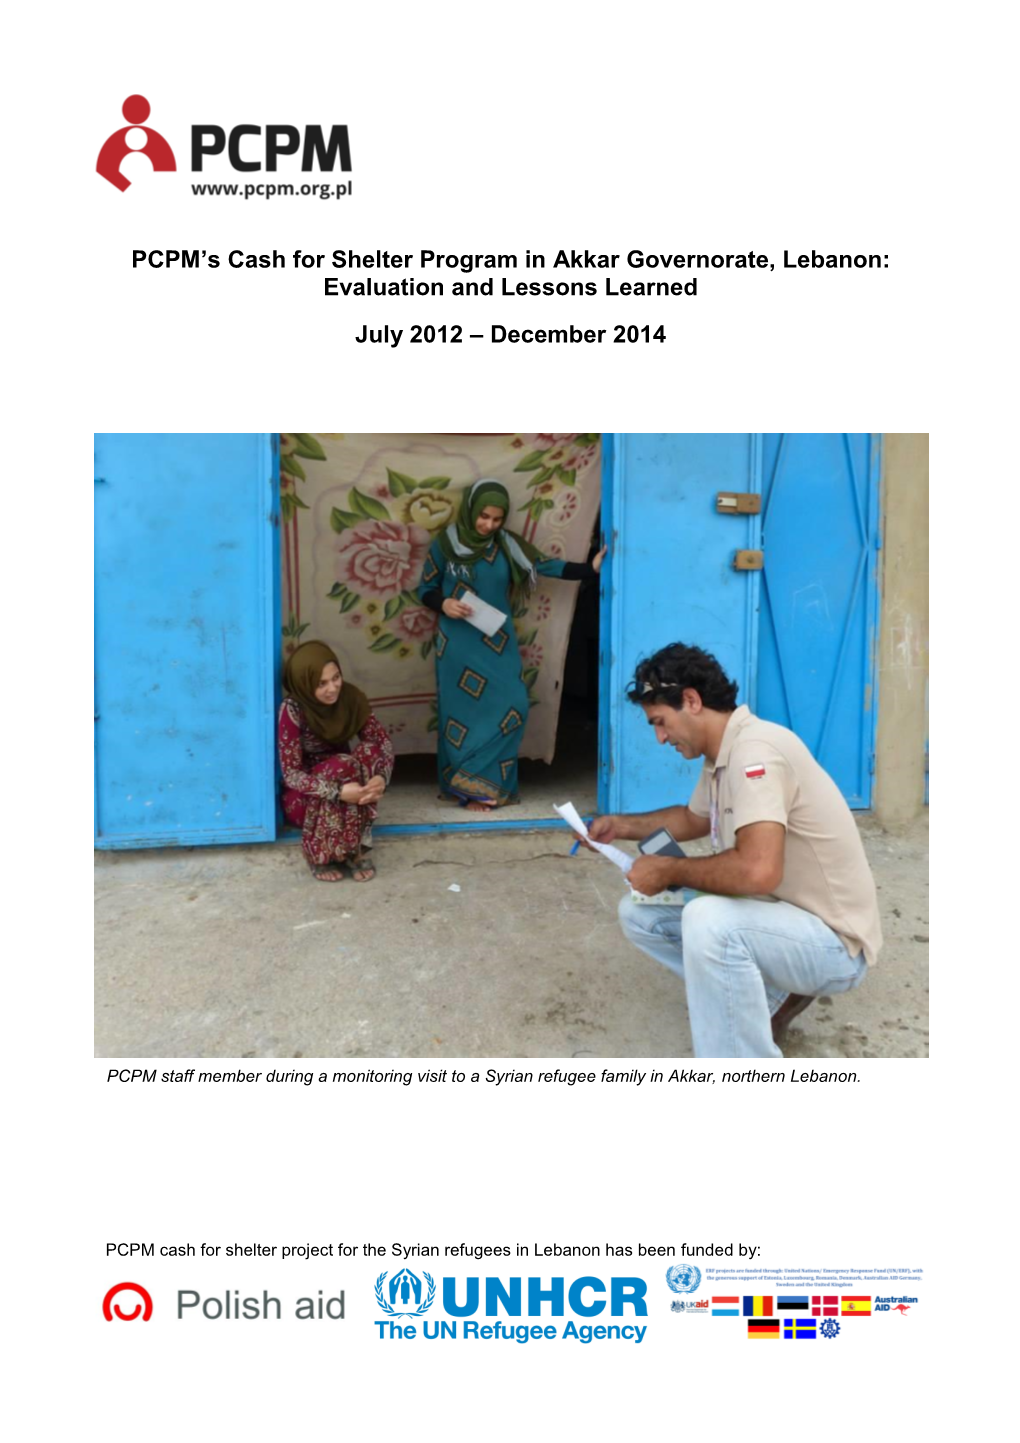 PCPM's Cash for Shelter Program in Akkar Governorate, Lebanon: Evaluation and Lessons Learned July 2012 – December 2014